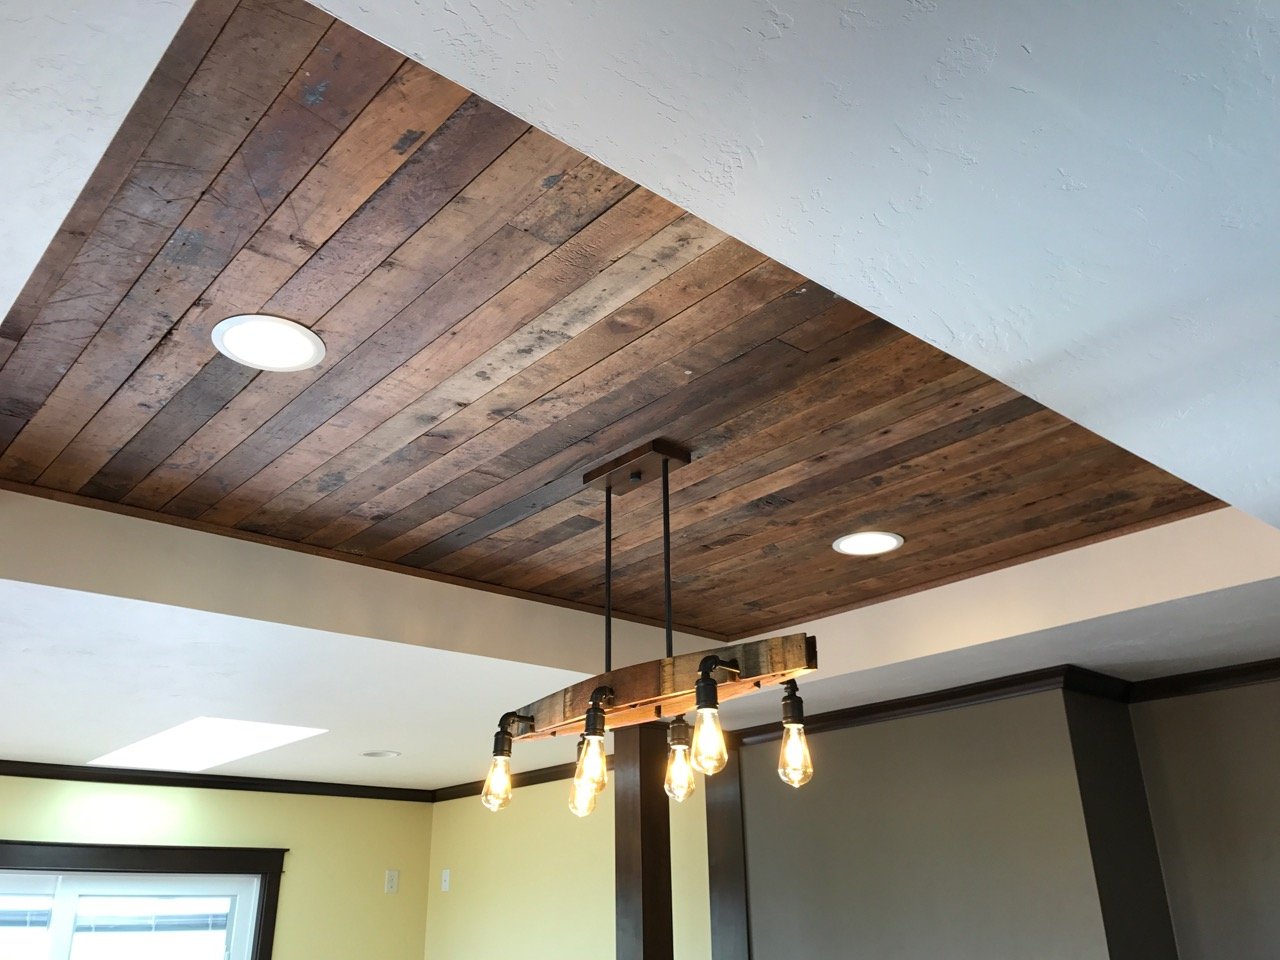 8 Ceiling Styles You Should Consider